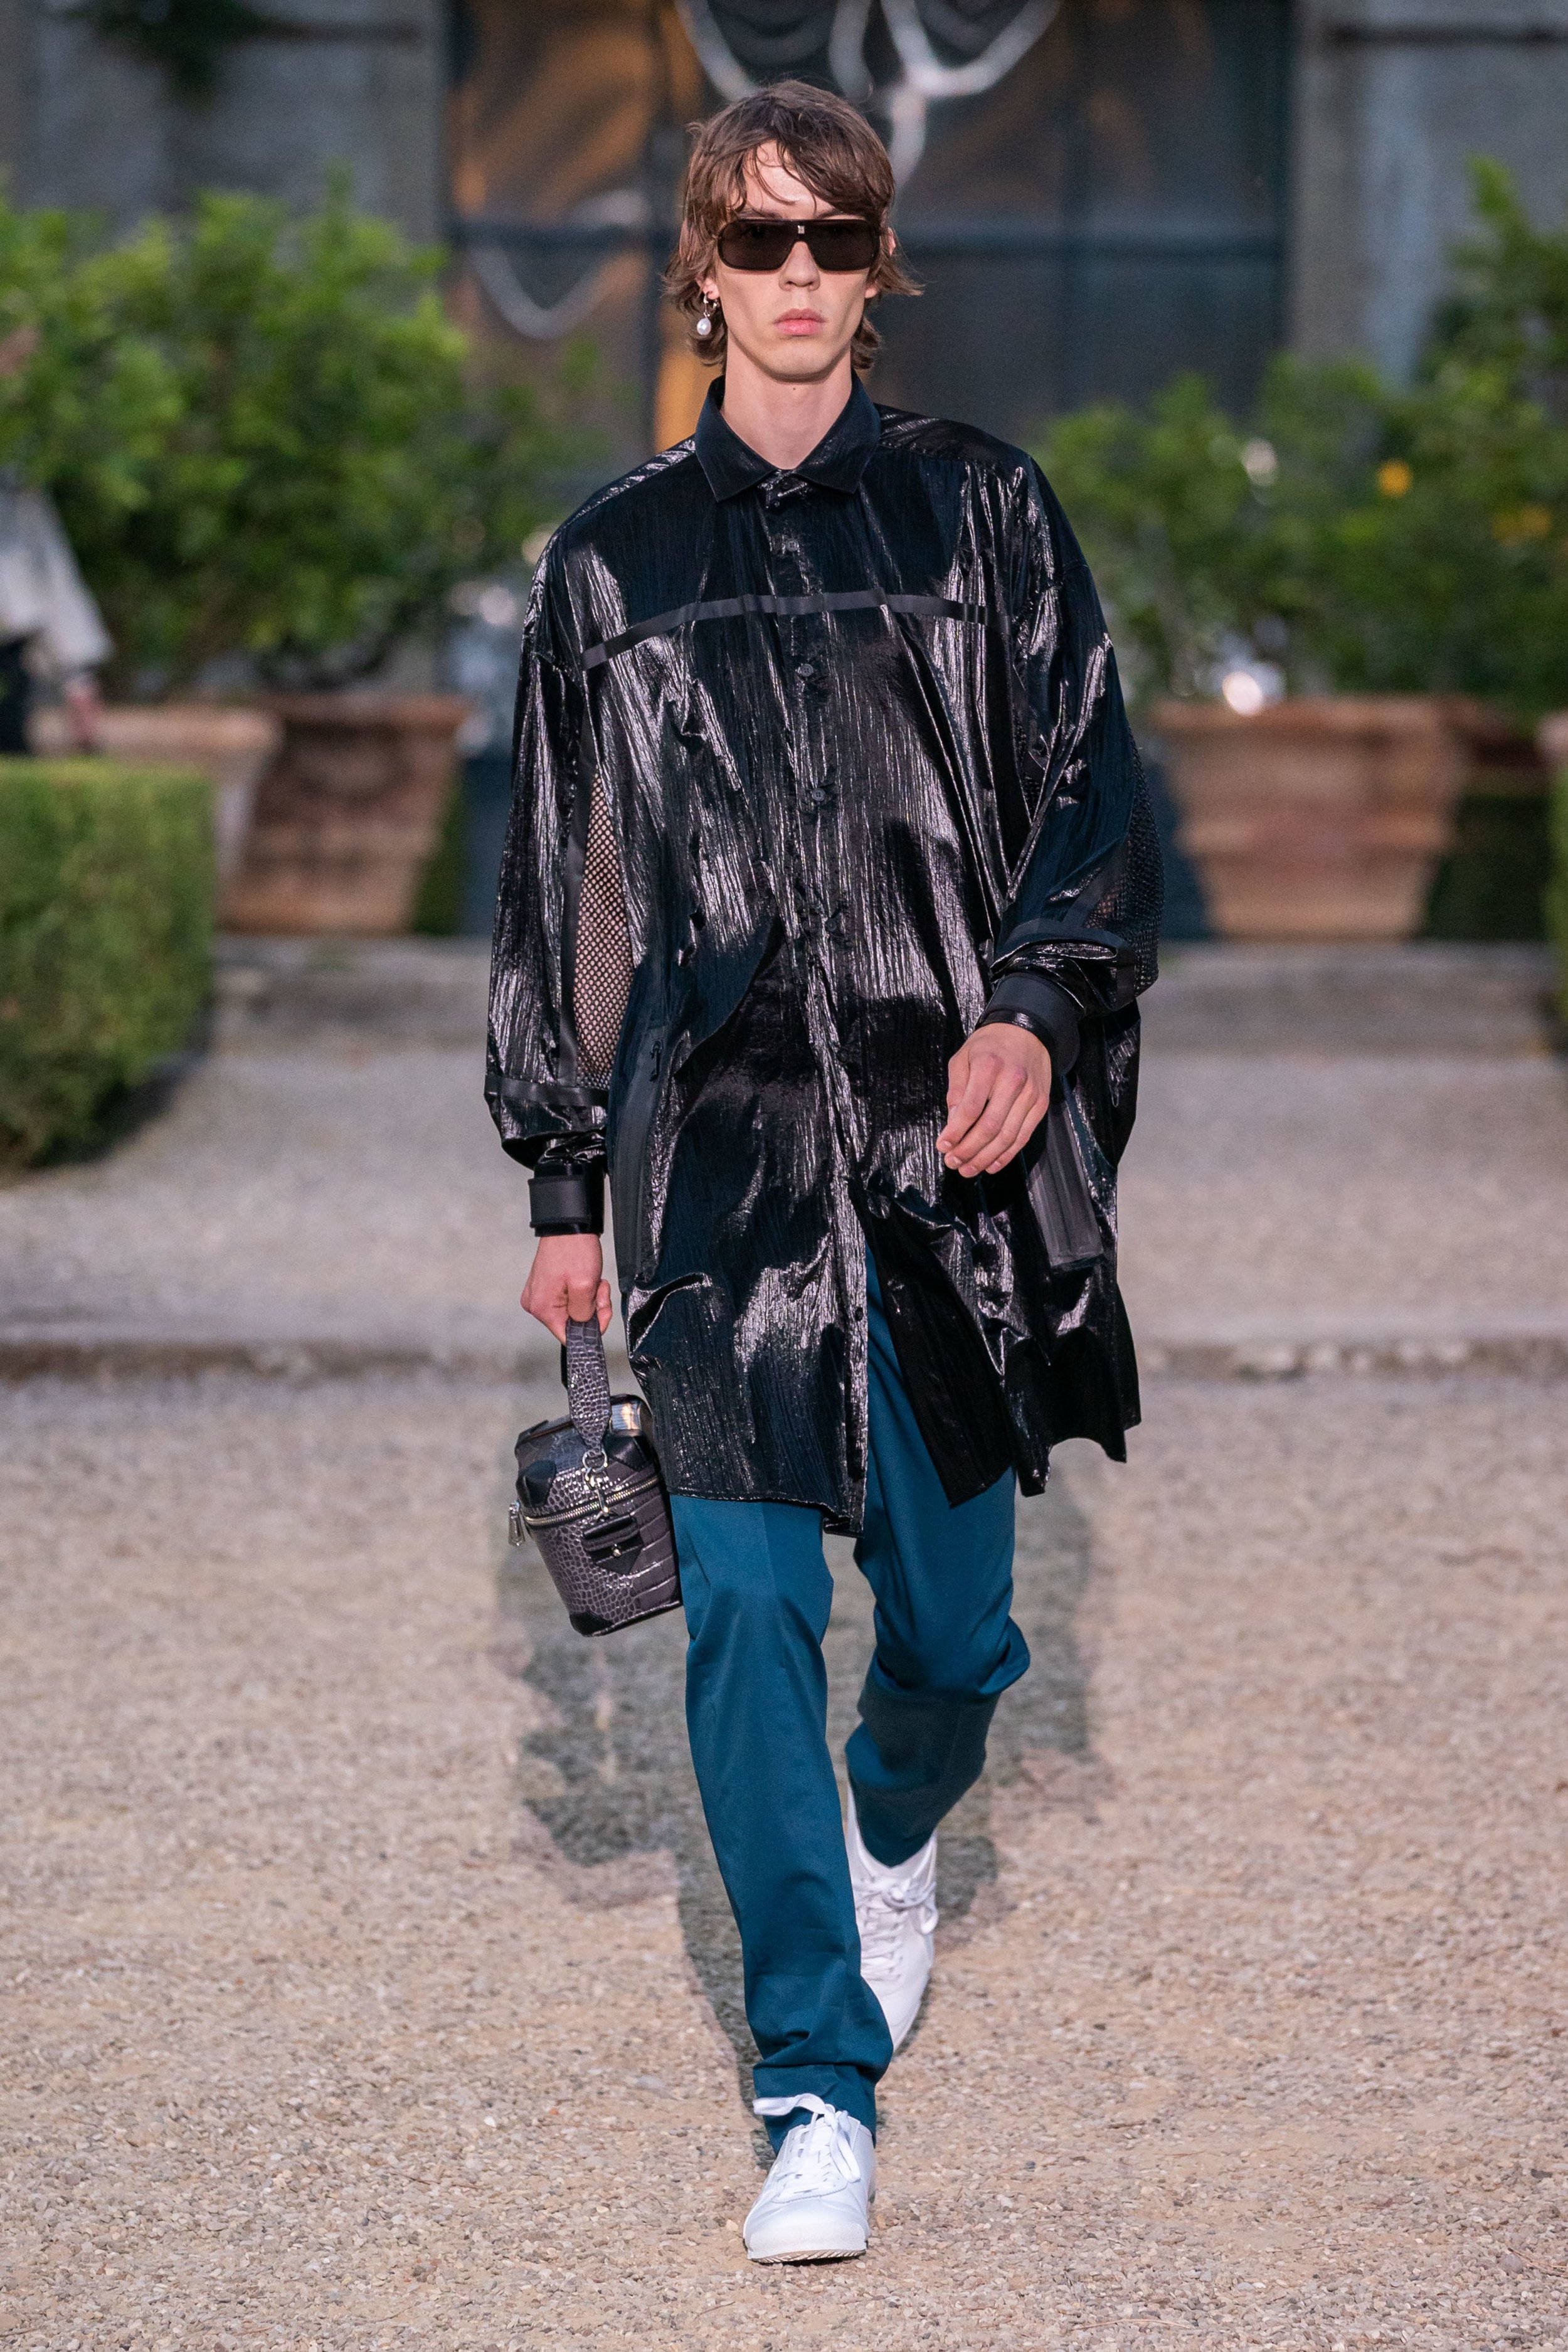 Behind_The_Blinds_Magazine_Givenchy_Men_SS20_Pitti_ALE0492.jpg